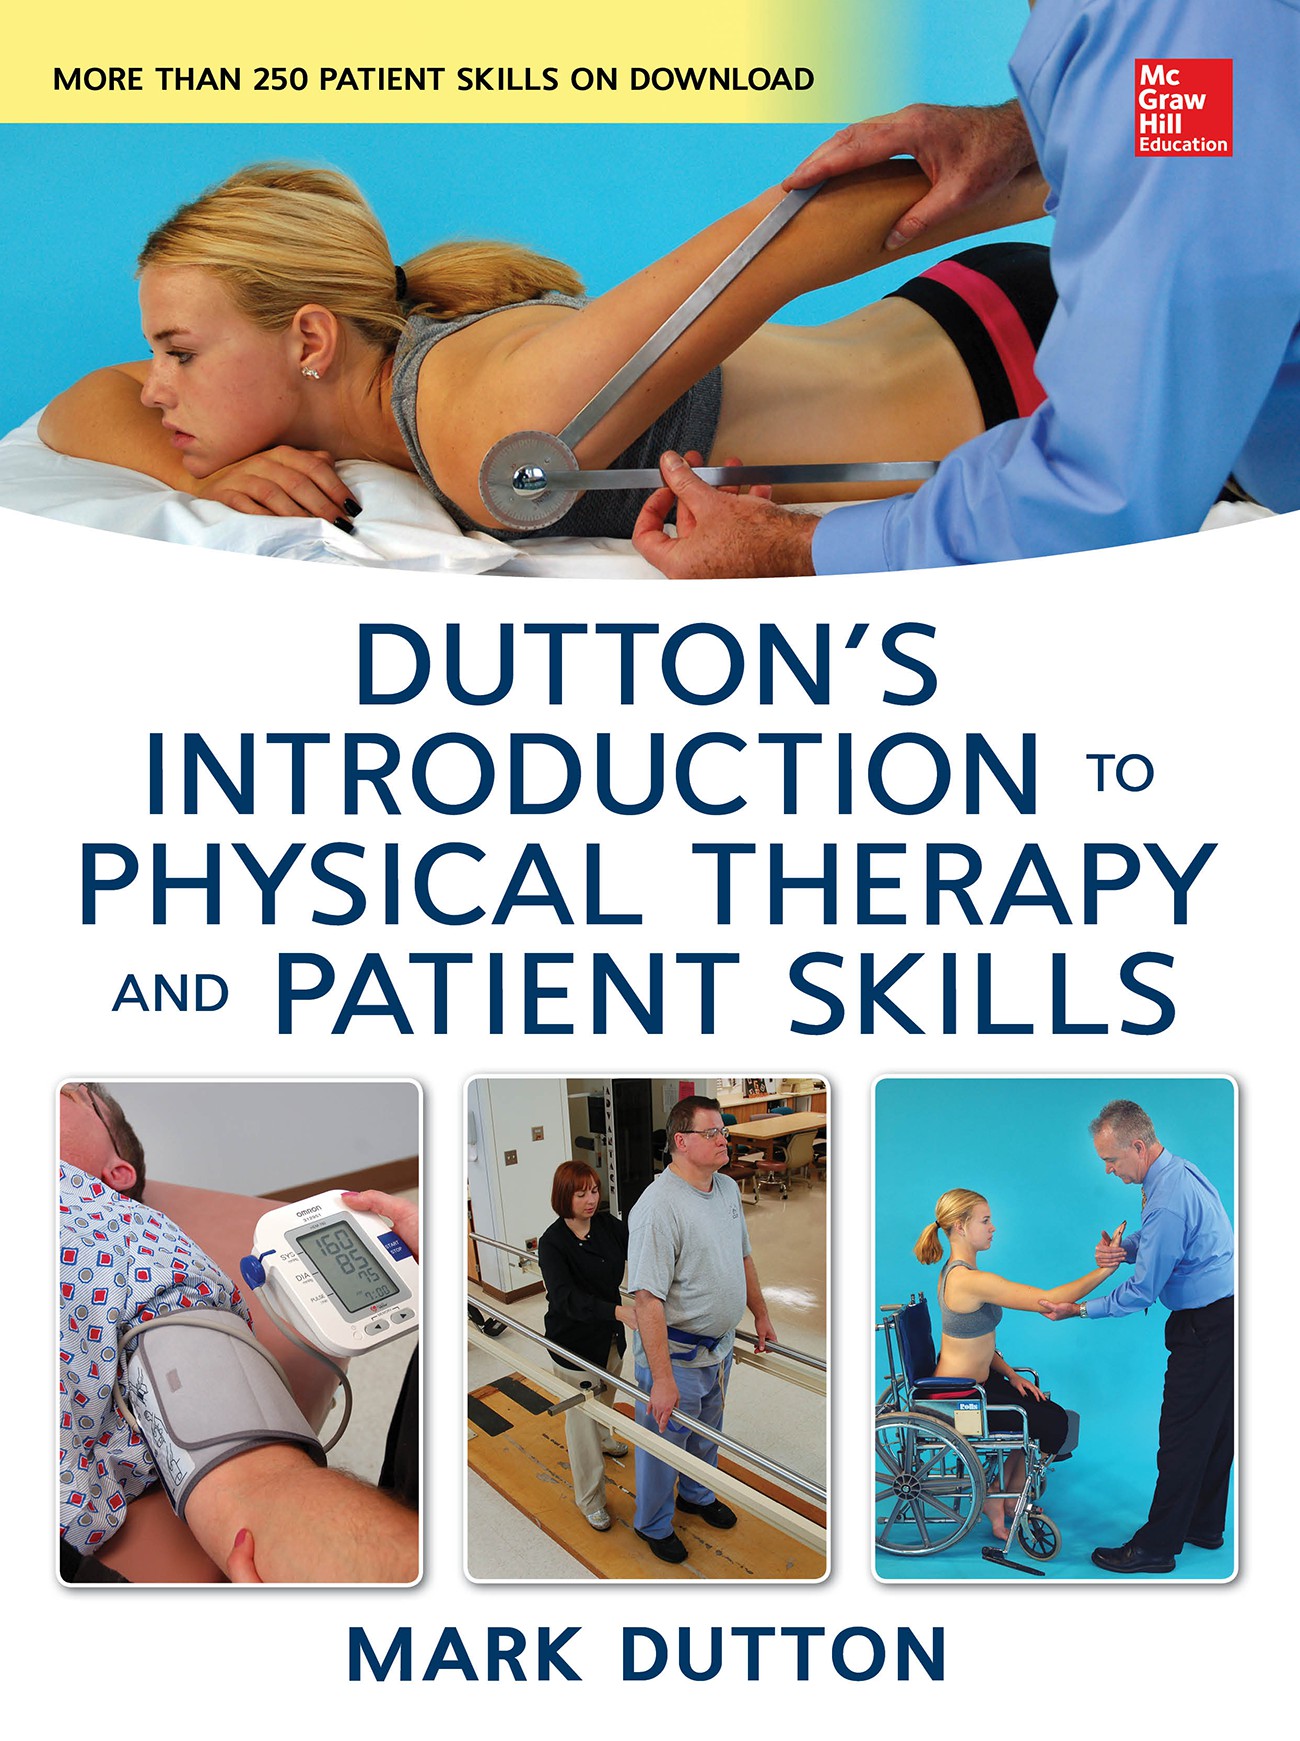 Dutton's Introduction to Physical Therapy and Patient Skills - 50-99.99